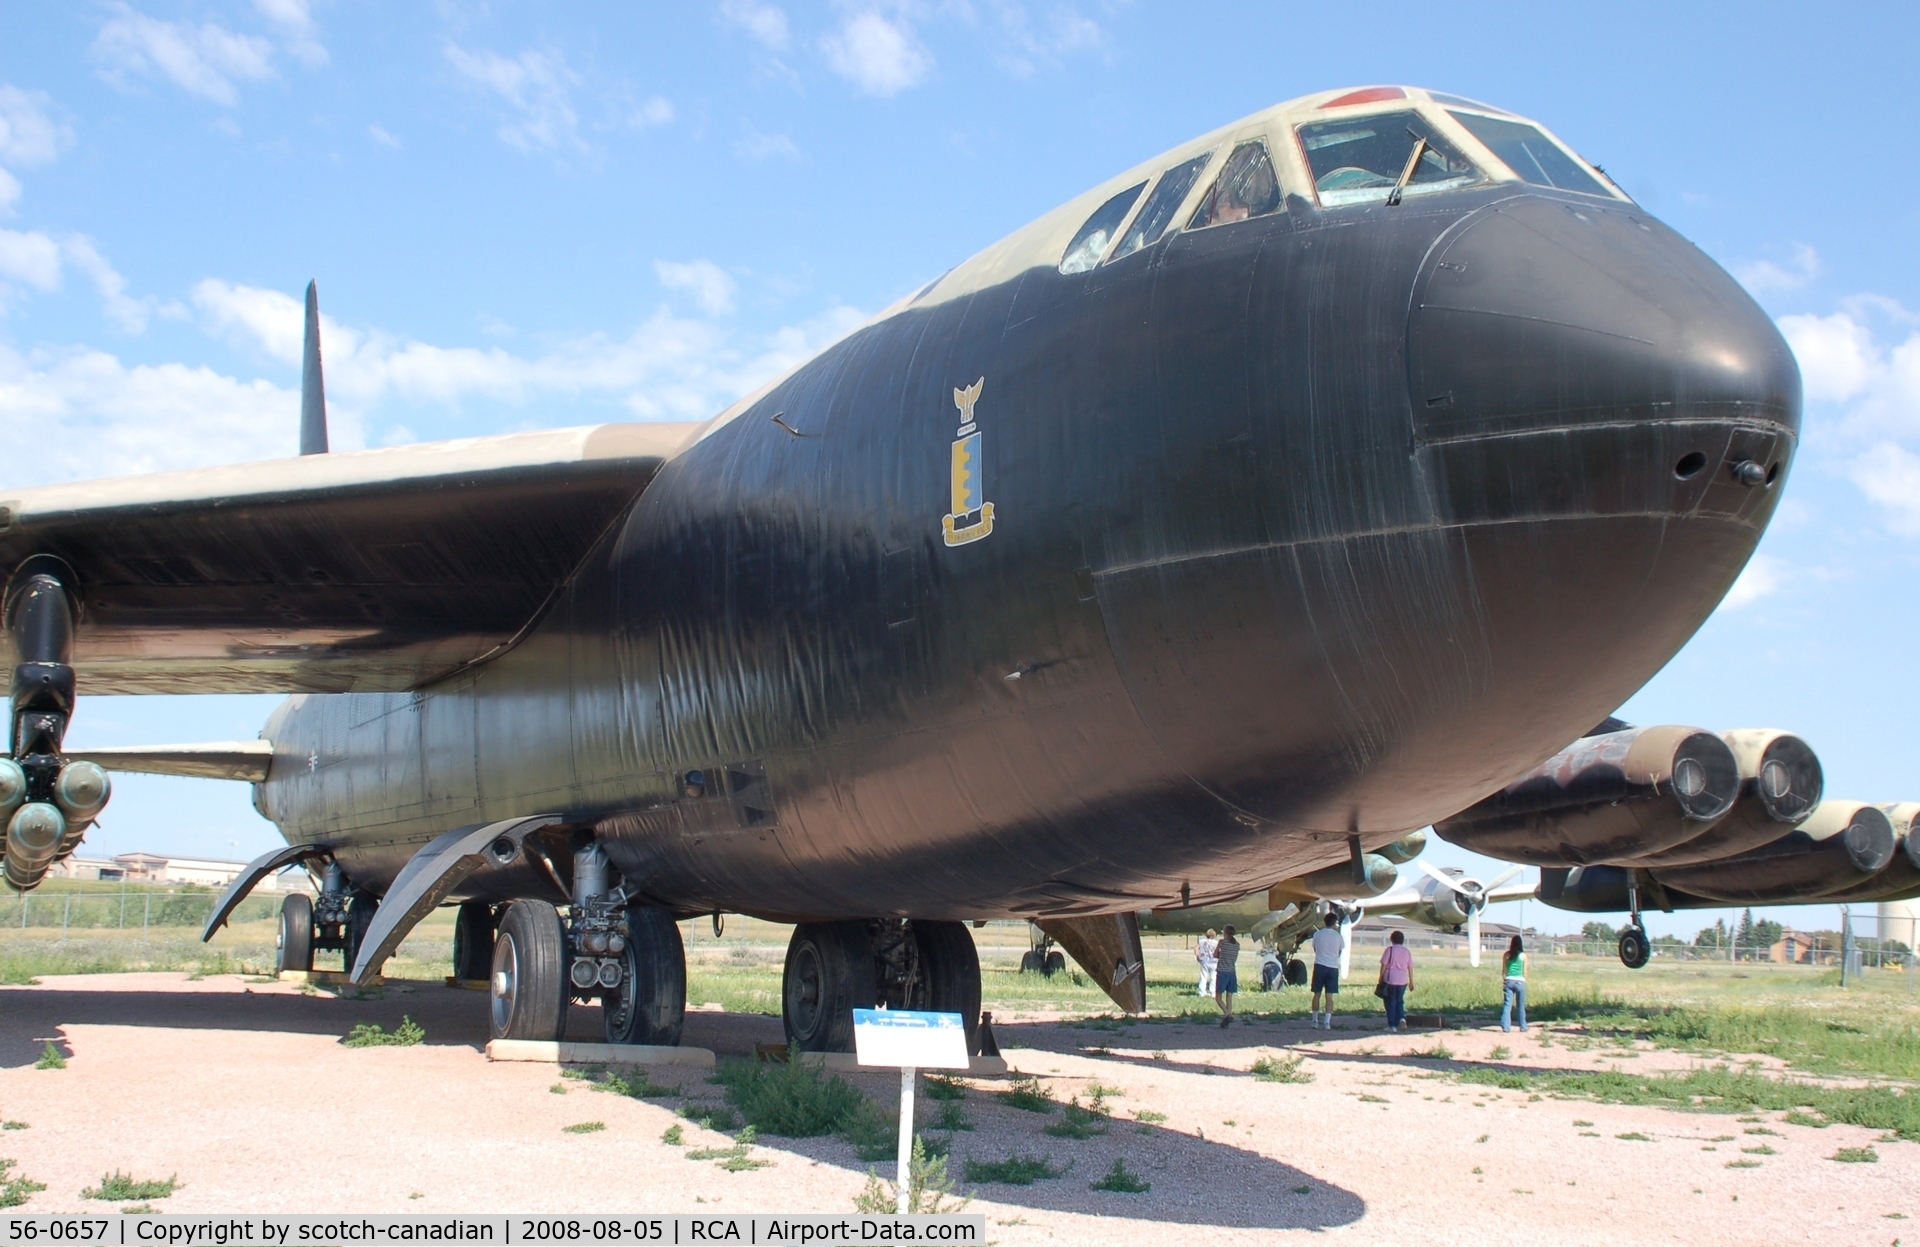 56-0657, 1956 Boeing B-52D-30-BW Stratofortress C/N 464028, 1956 Boeing B-52D-30-BW Stratofortress at the South Dakota Air and Space Museum, Box Elder, SD